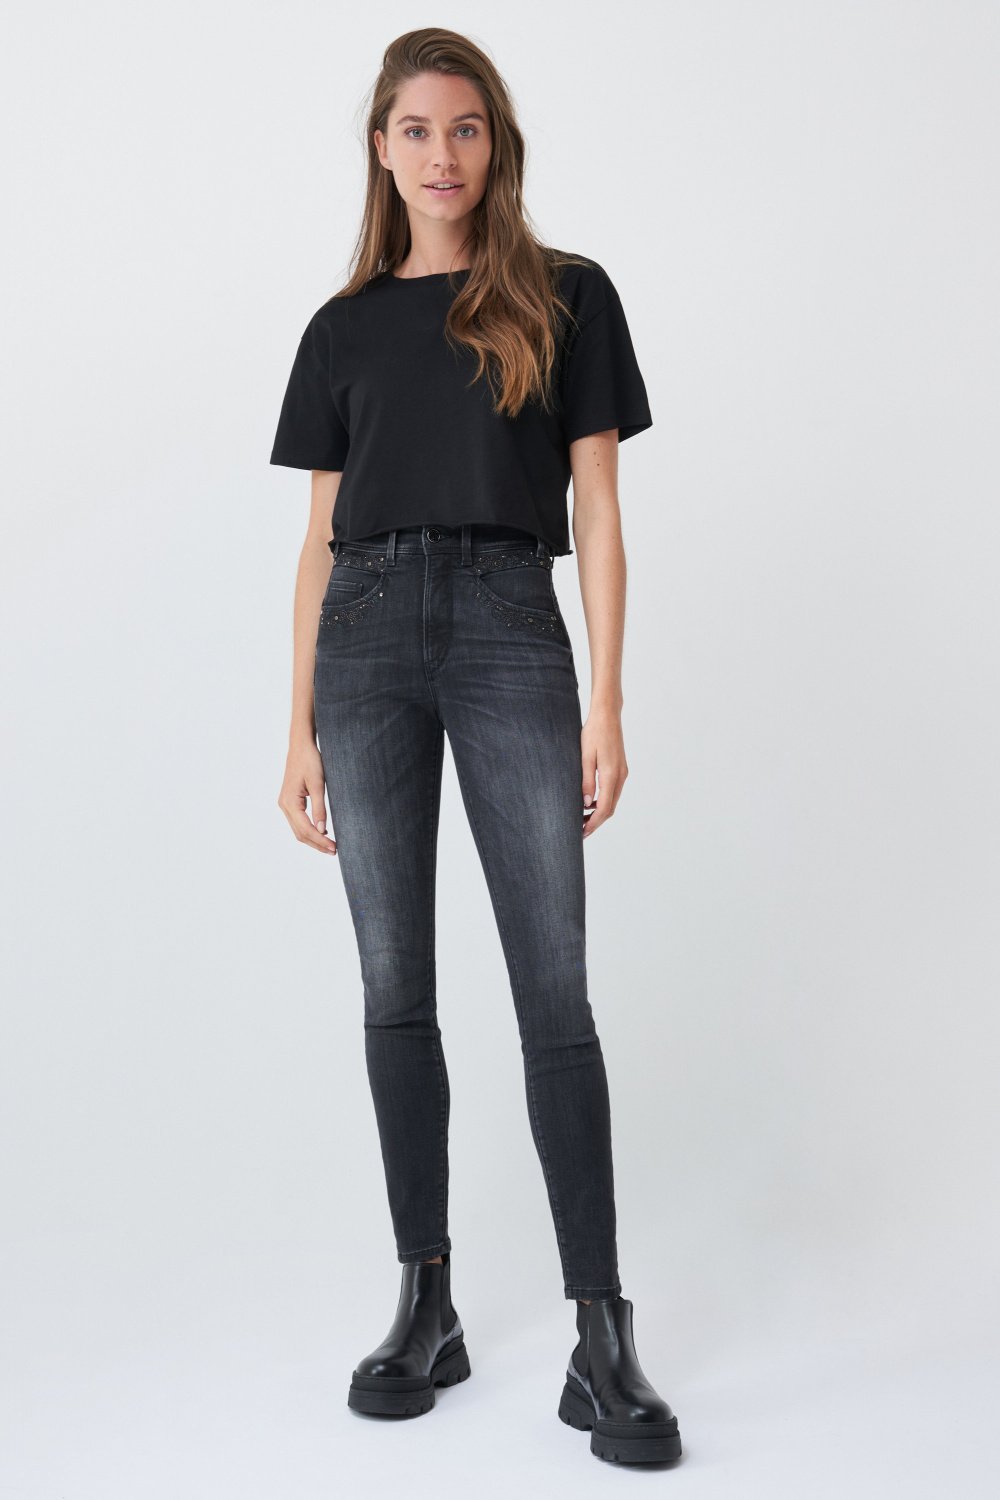 PUSH IN FAITH SKINNY JEANS WITH STITCHED DETAIL | Salsa